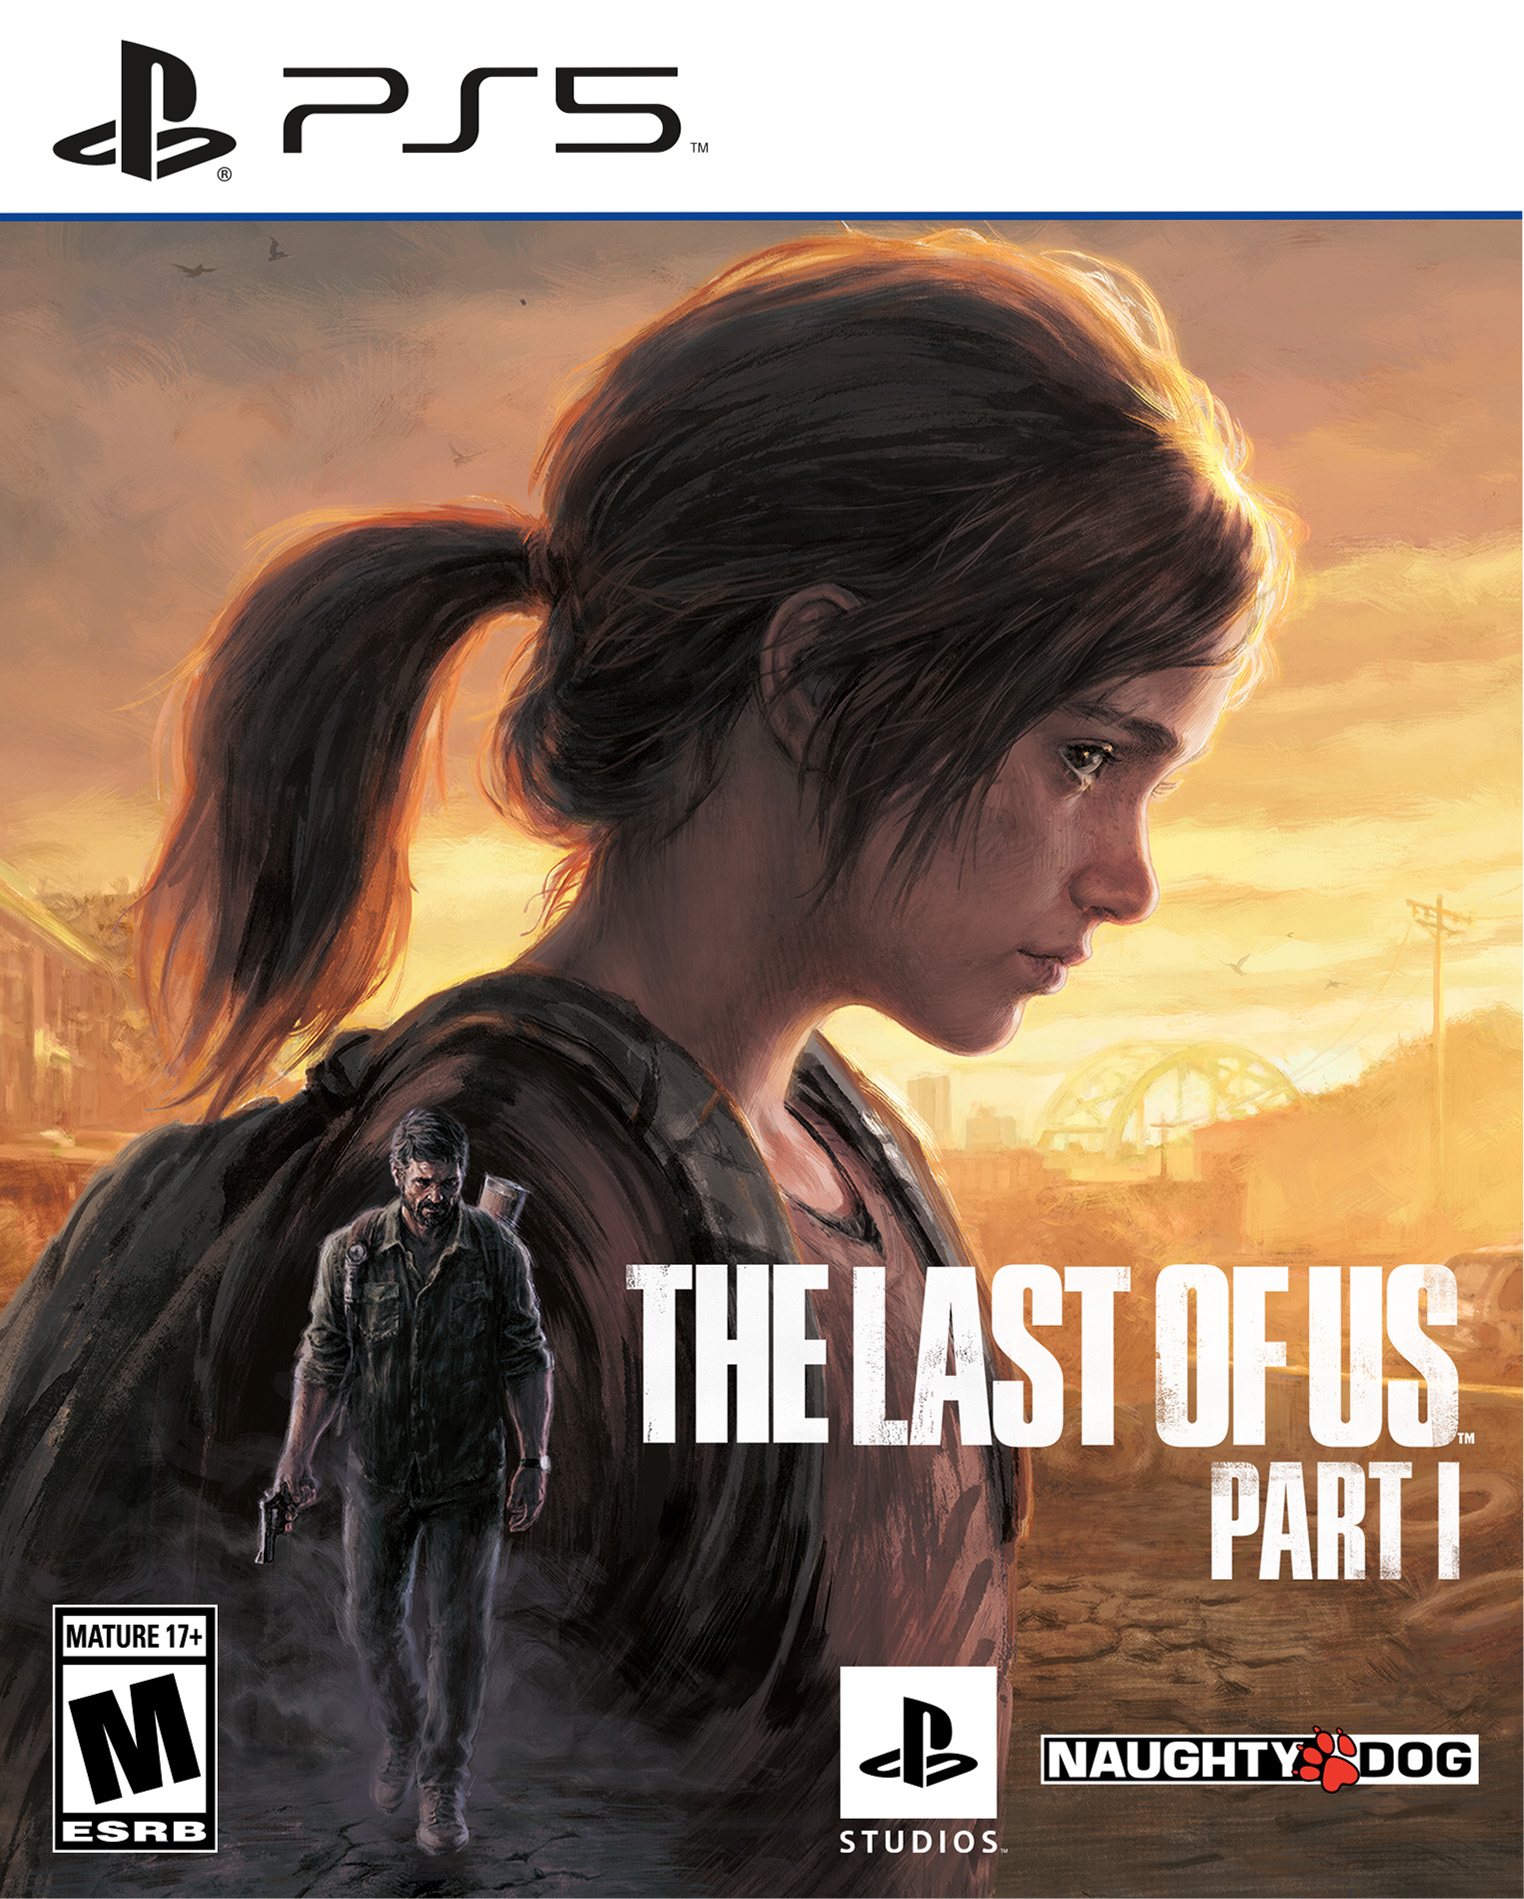 The Last of Us in The Last of Us 